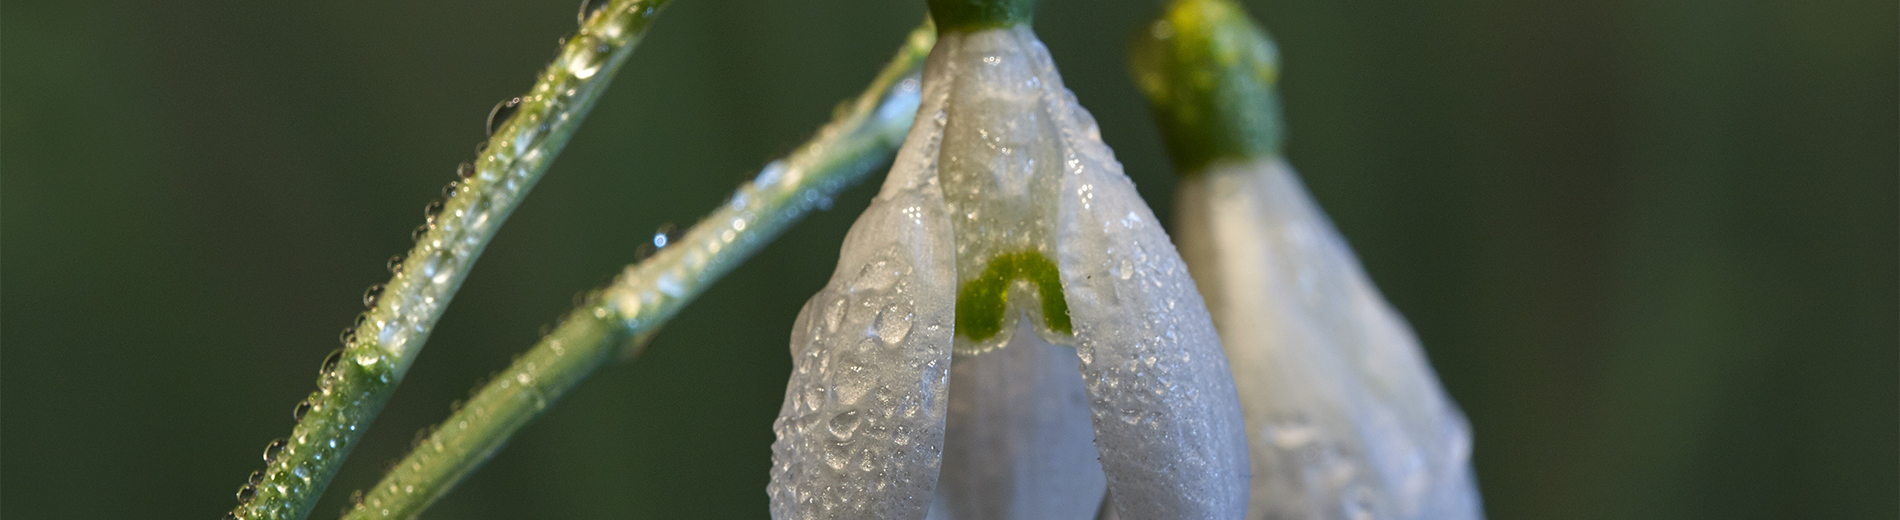 Photo session of snowdrops